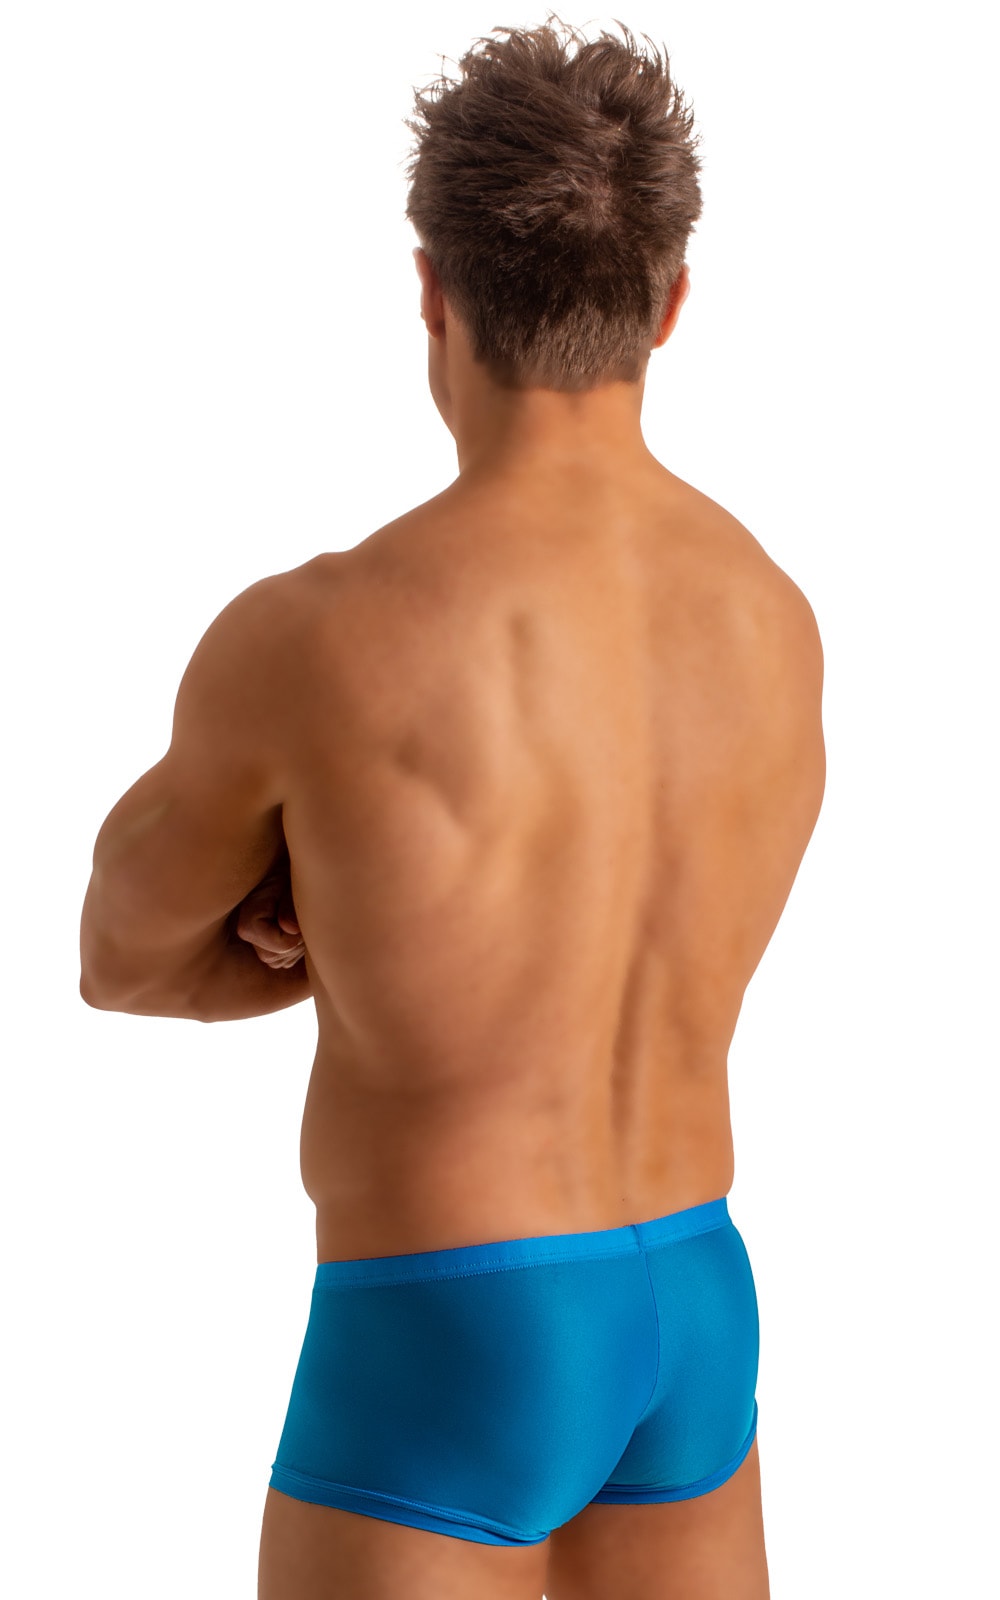 Extreme Low Square Cut Swim Trunks in Super ThinSKINZ Turquoise 2